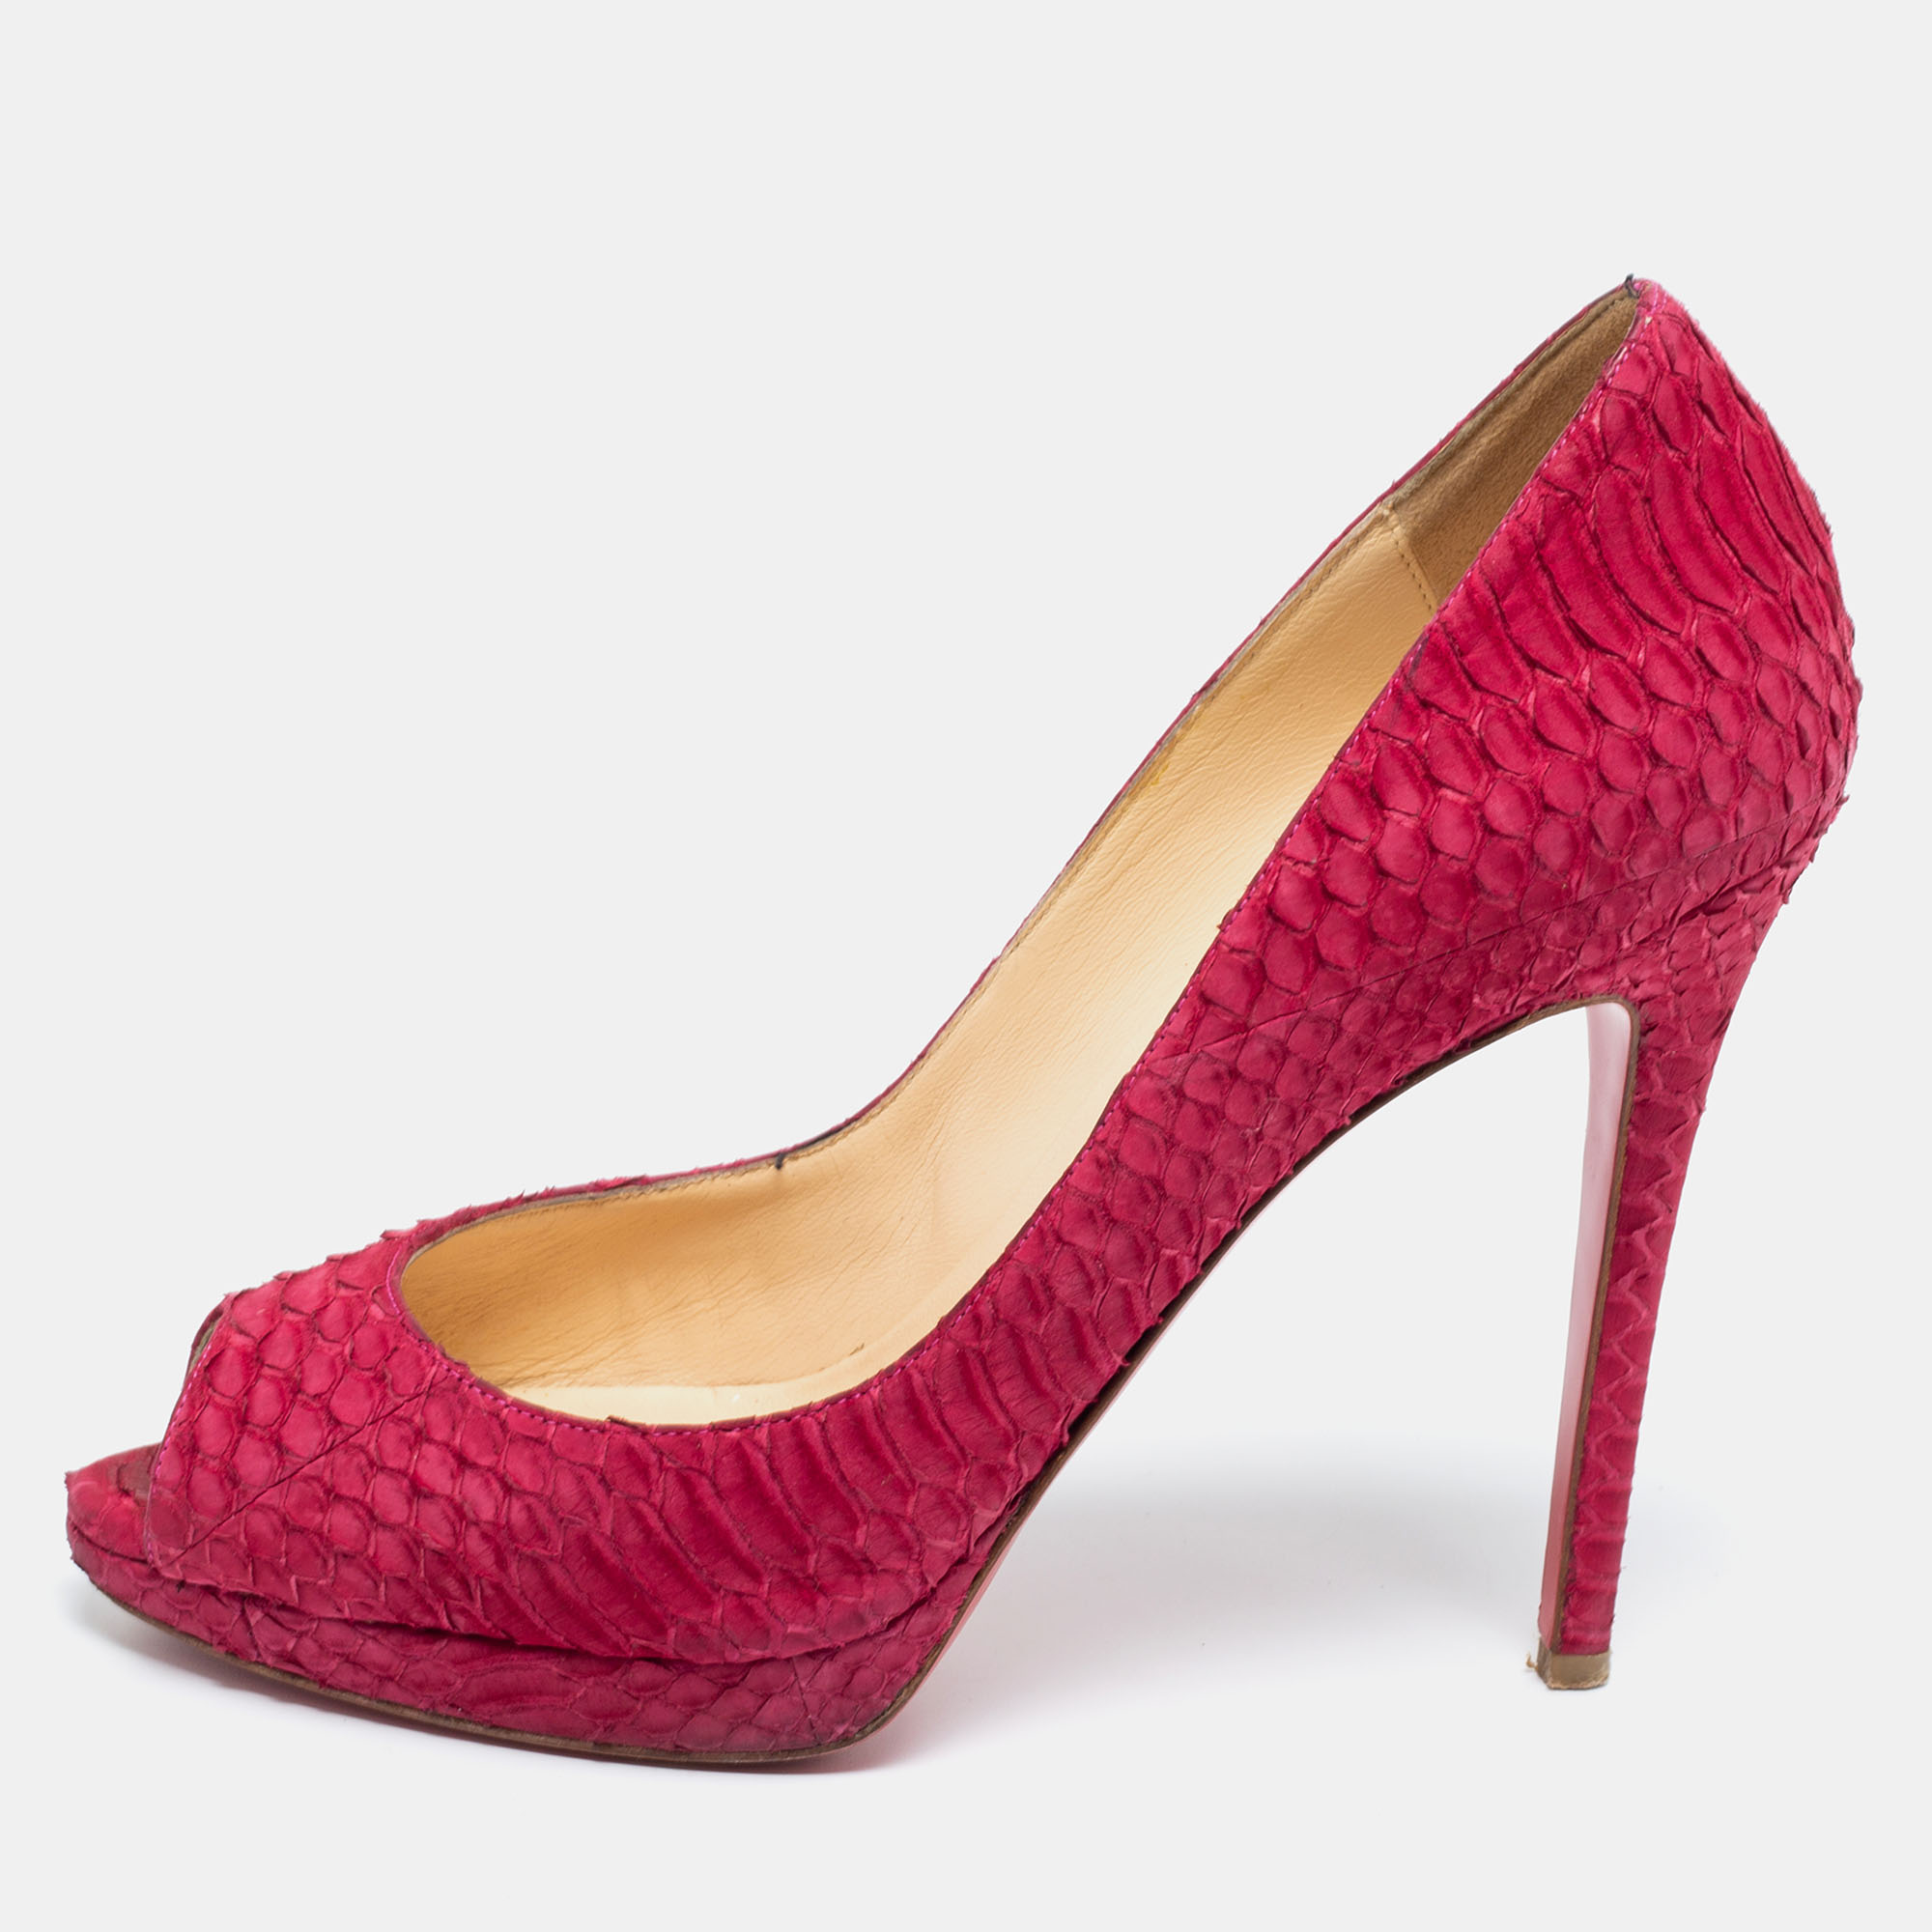 The chic design in dark pink python leather is given a textured surface a peep toe and a low platform. For a classy effect the CL pumps are finished with 12 cm heels and red soles.